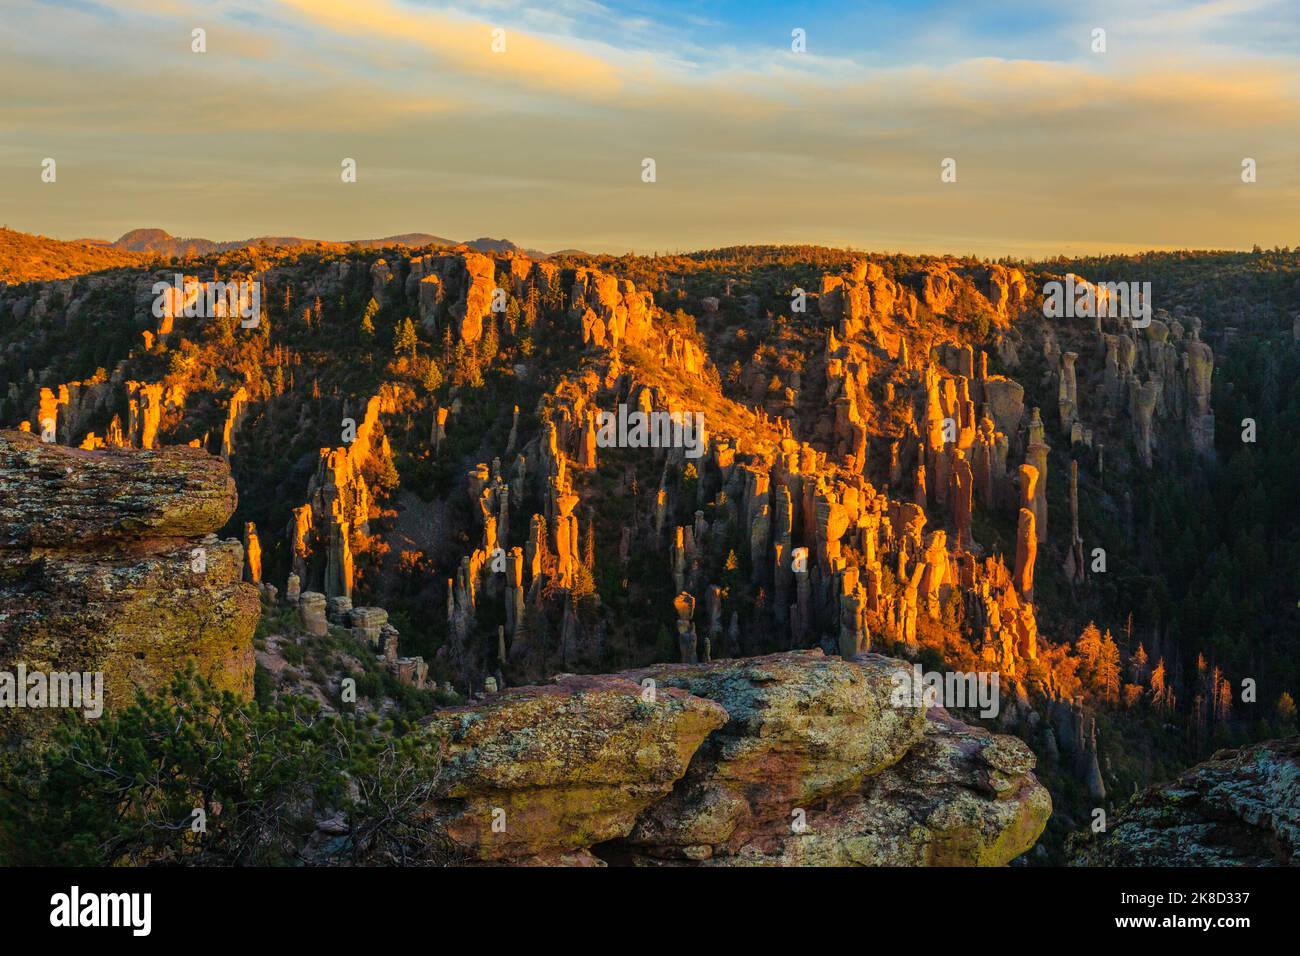 Sugarloaf Mountain has an expansive view of the Chiricahua National Monument, southern Arizona. Stock Photo